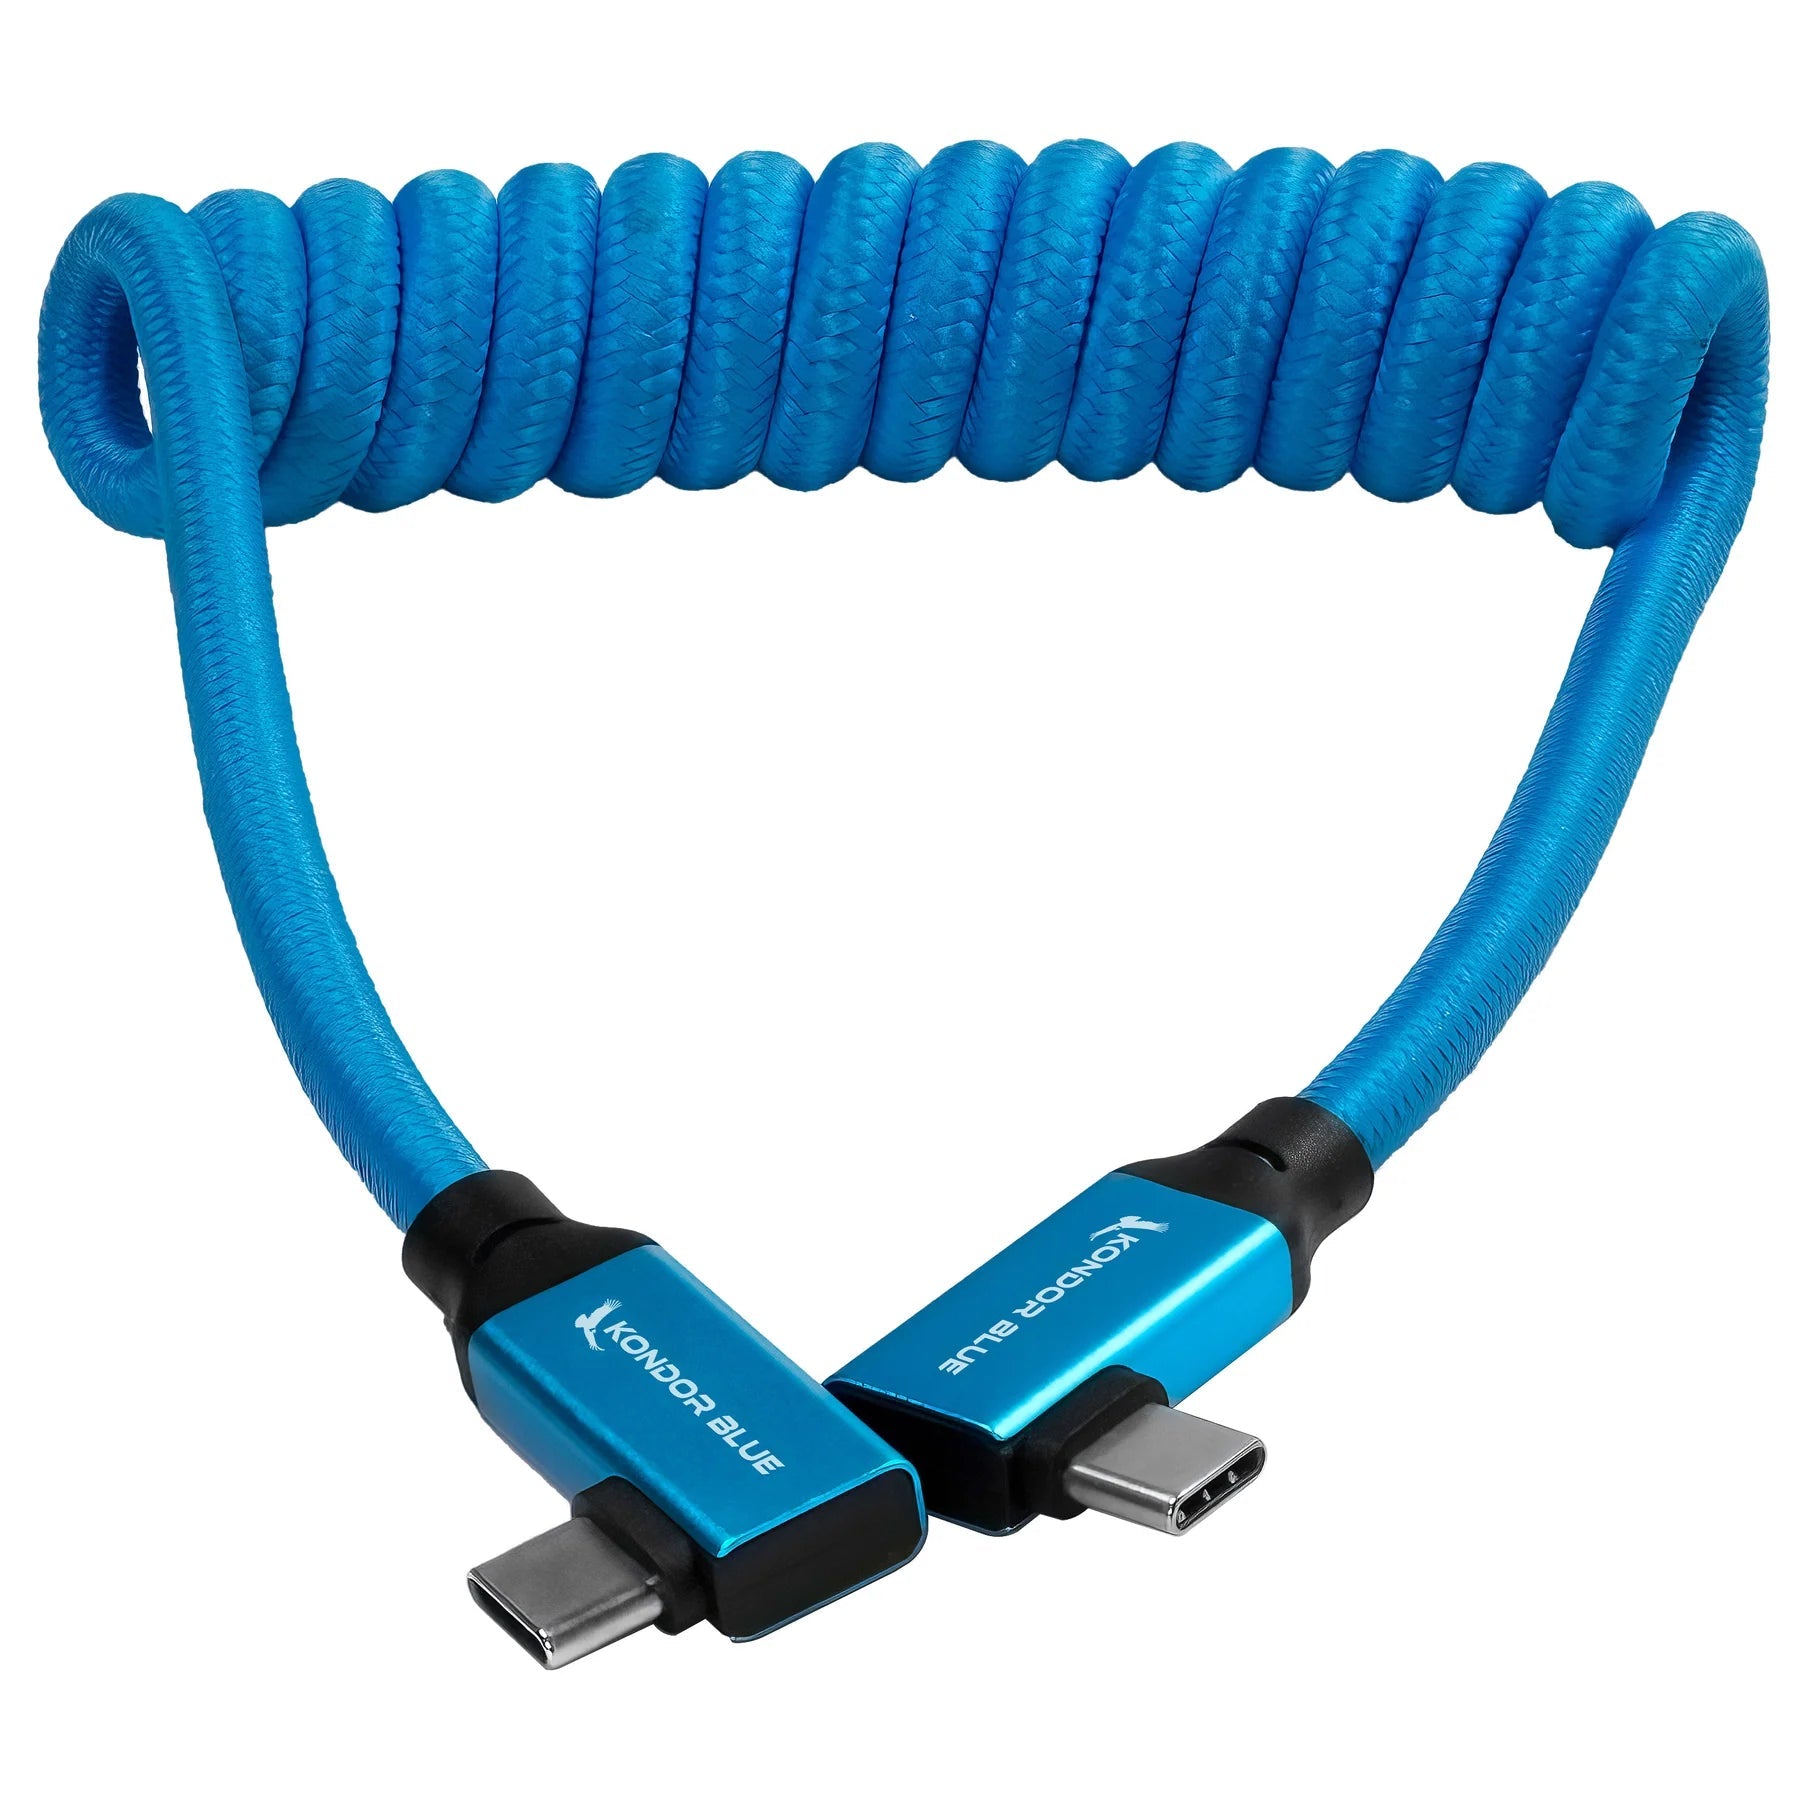 Kondor Blue 12-24” Coiled USB-C Right Angle Braided Cable (Blue) - B&C Camera